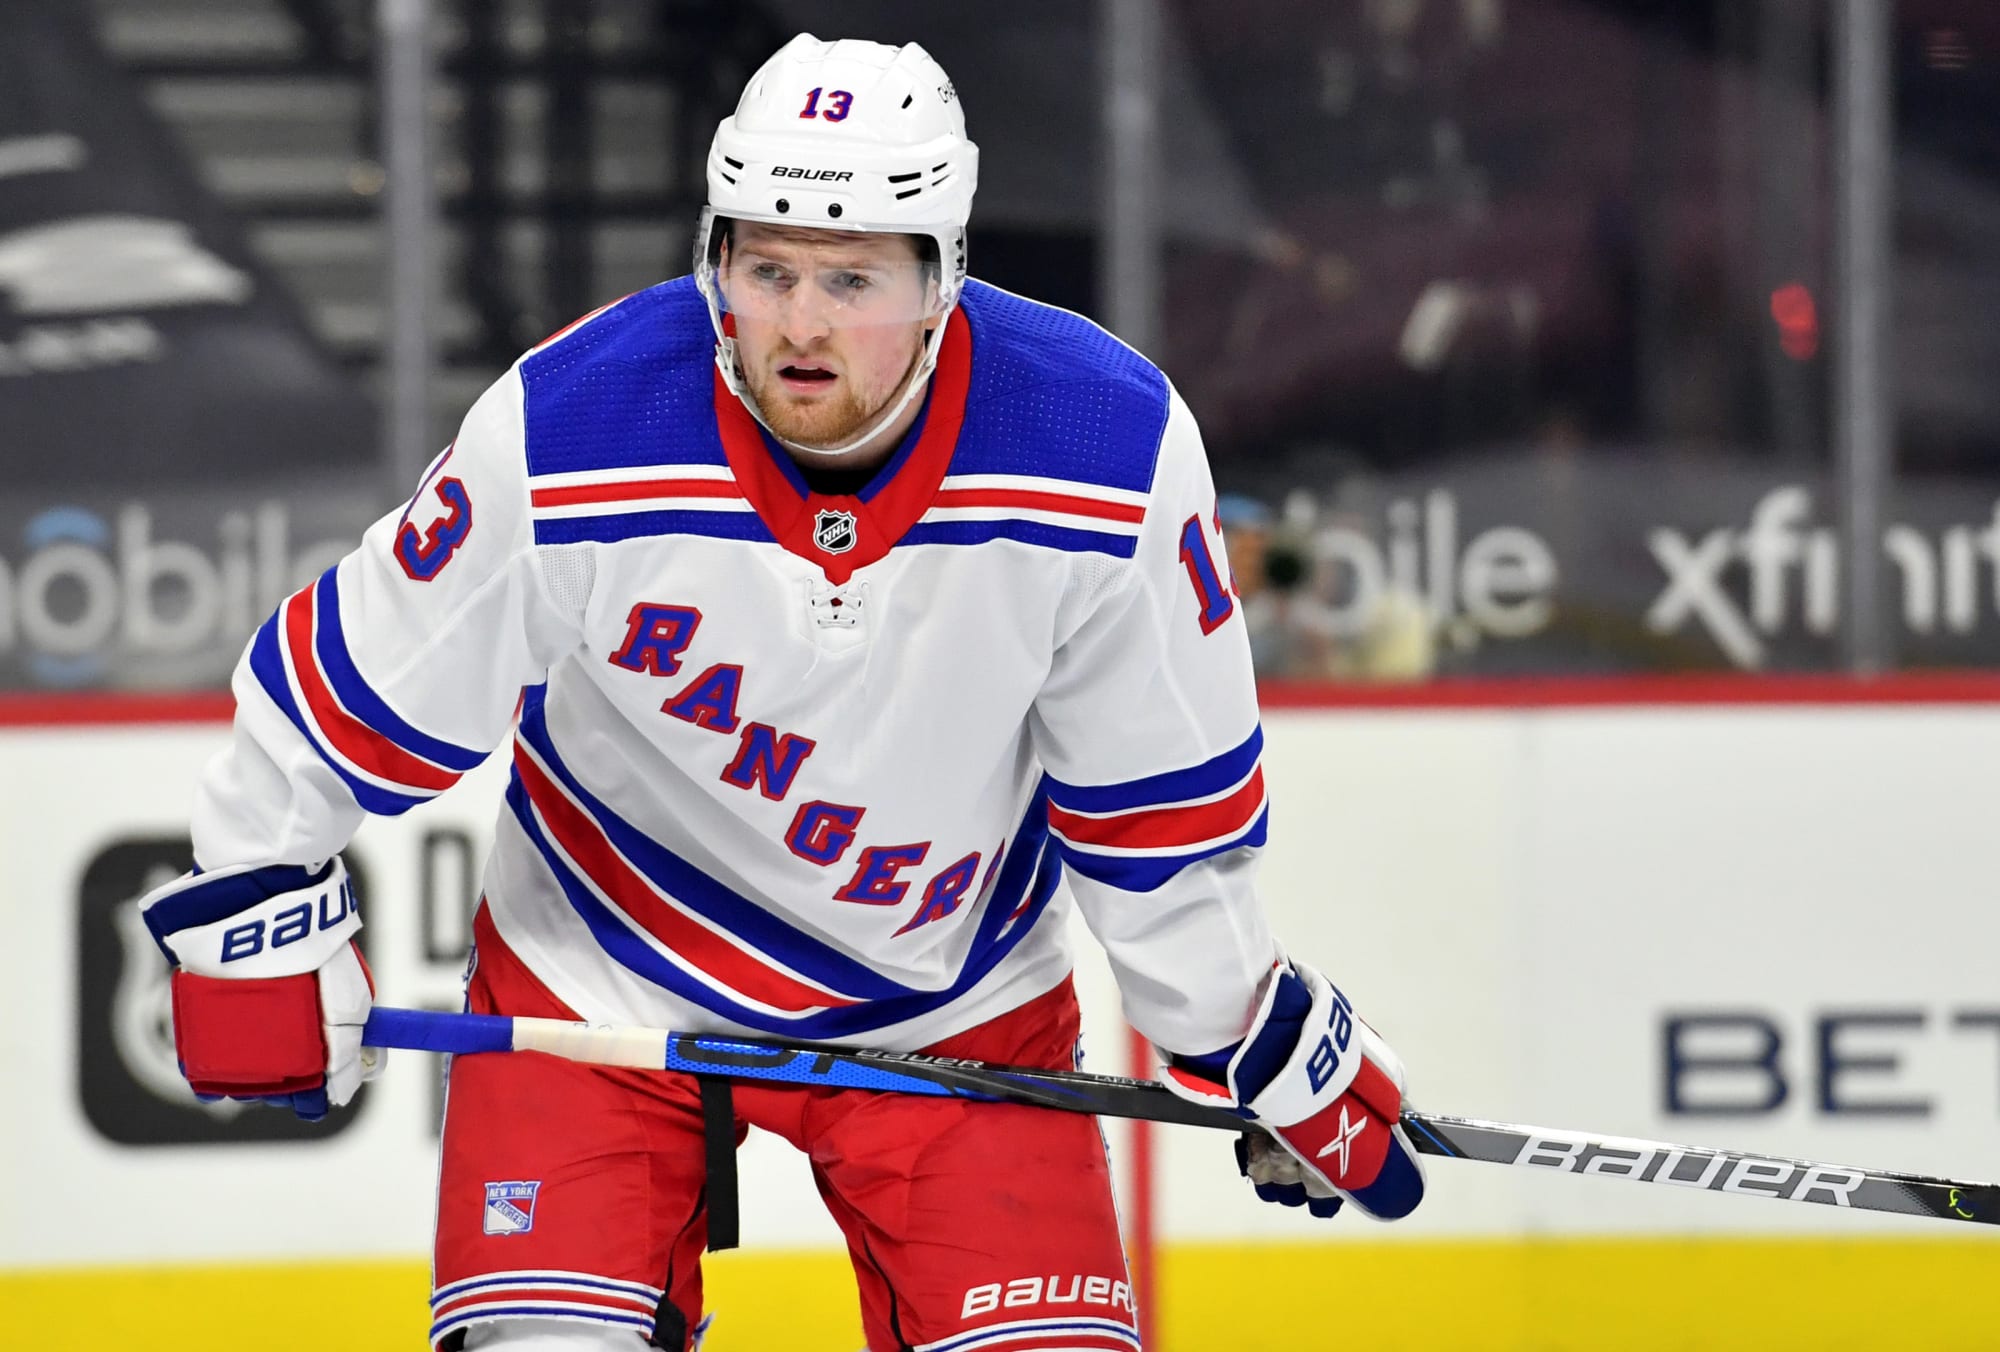 New York Rangers Alexis Lafreniere shows off insane ability with one